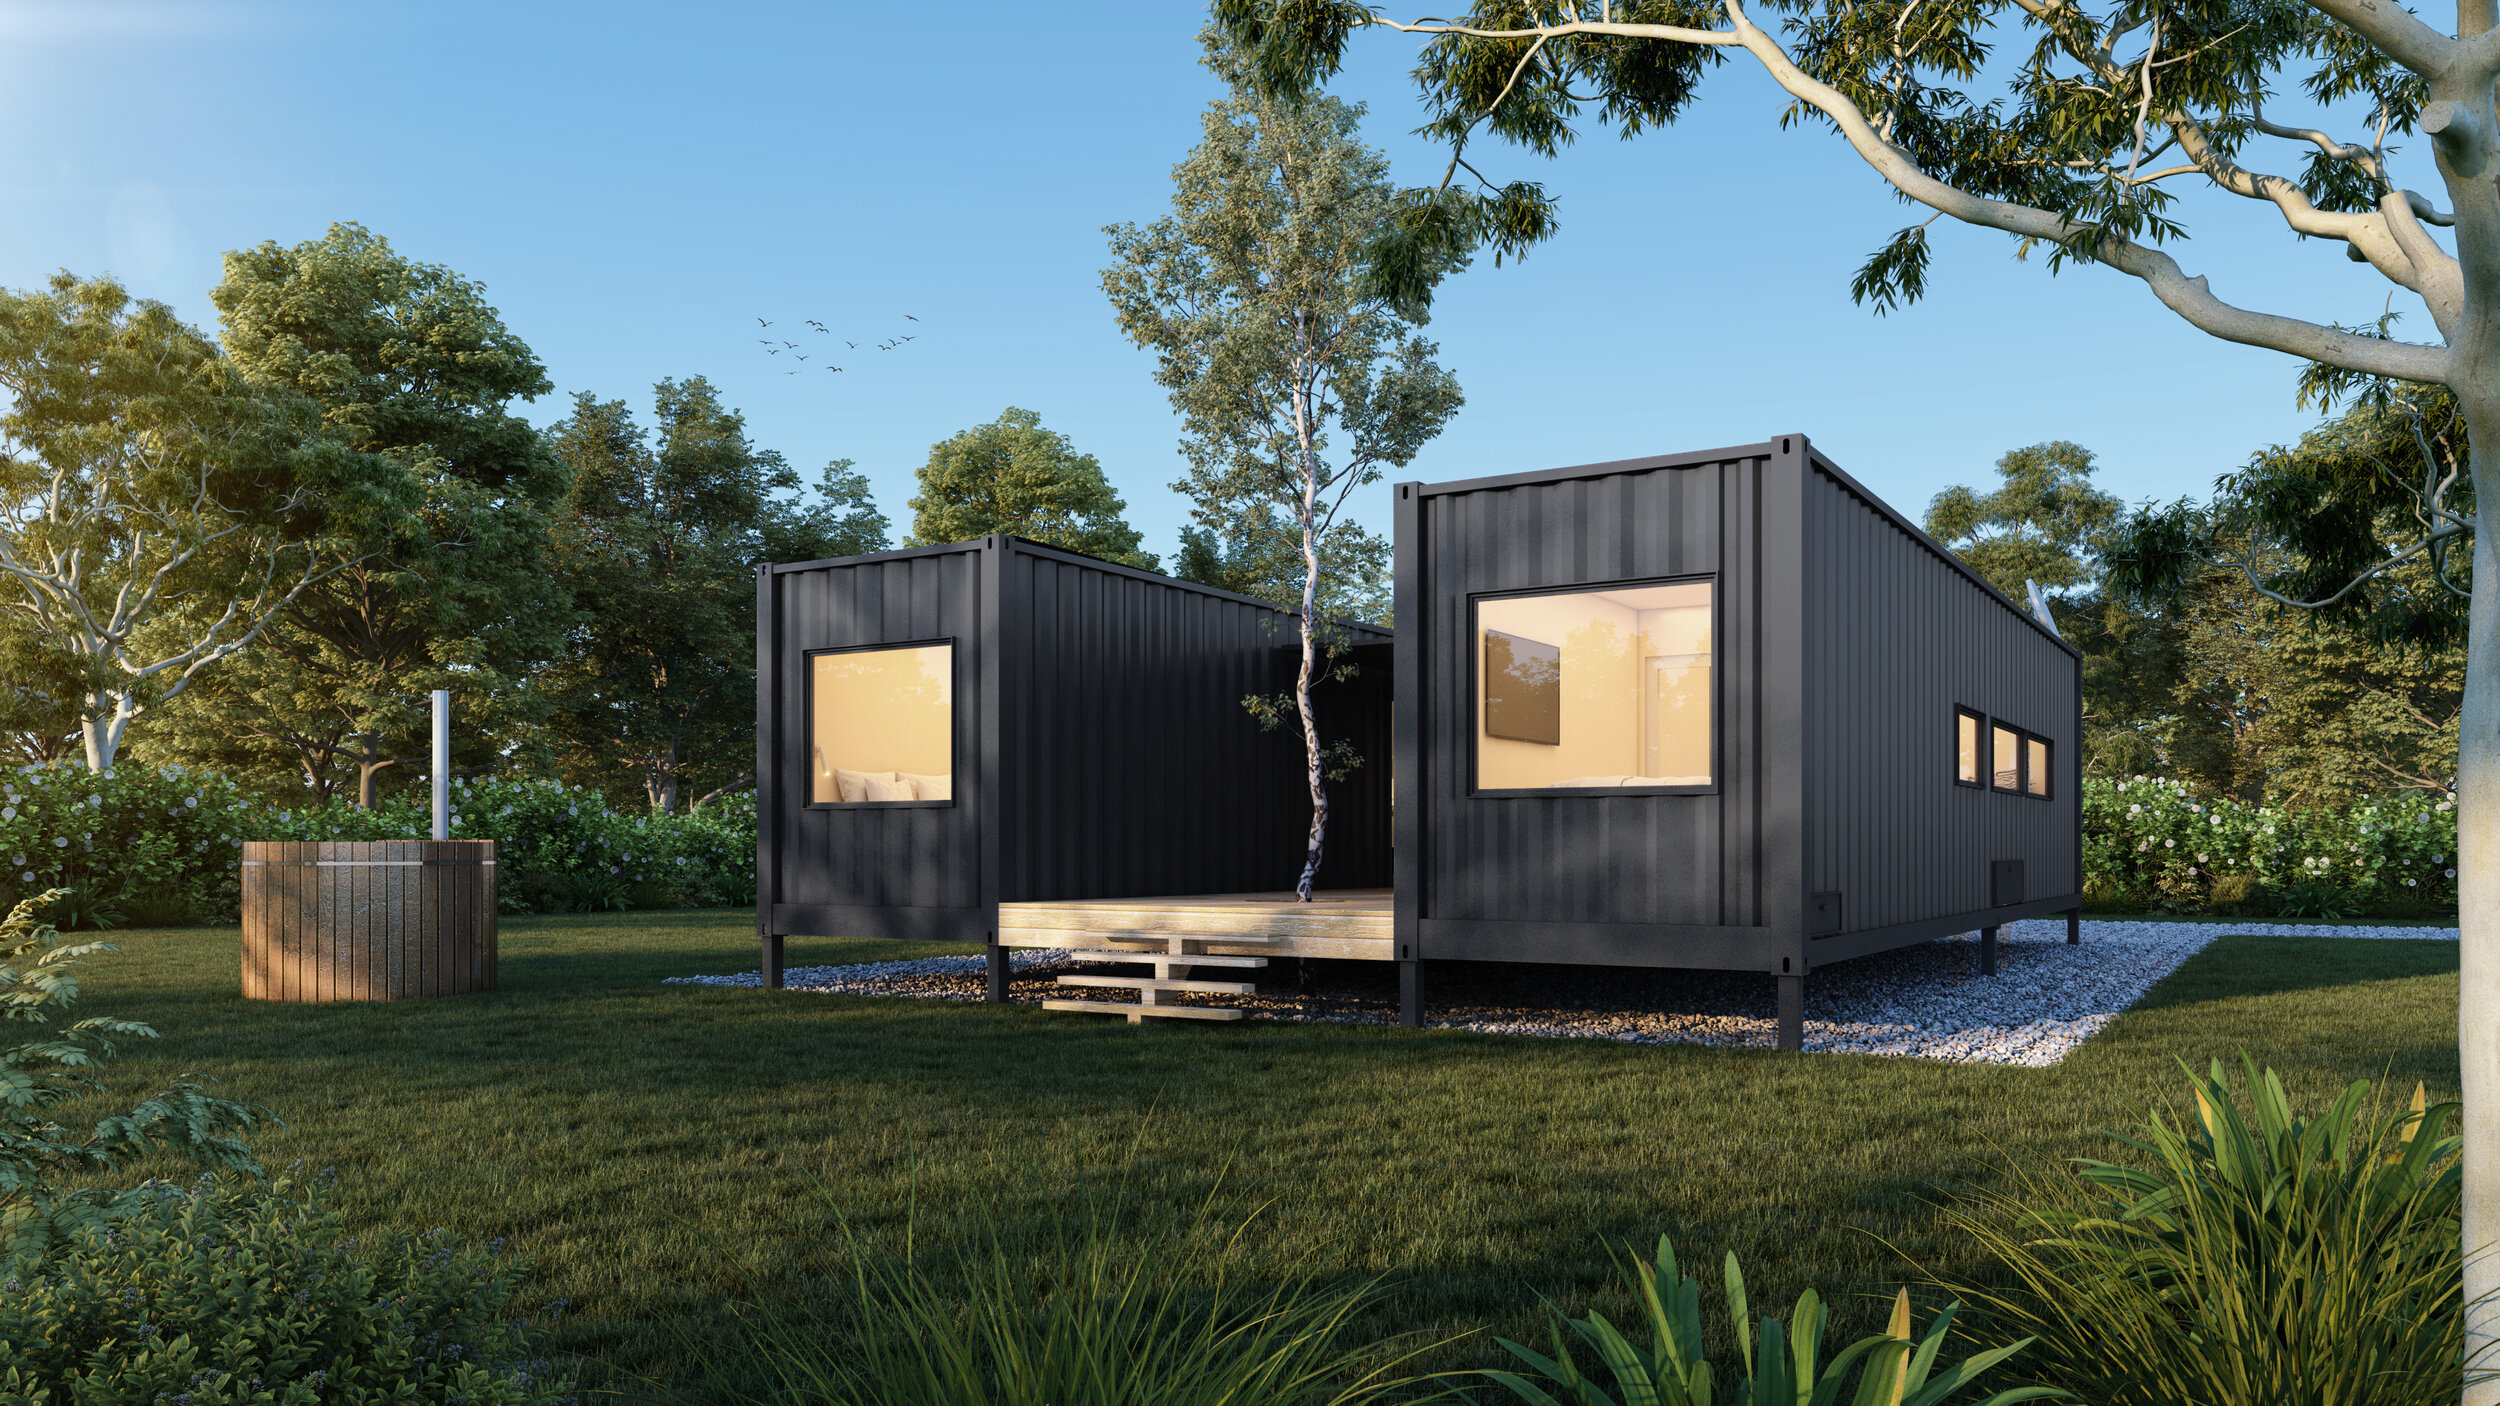 4 Bedroom Container Home_Hi-Res.jpg